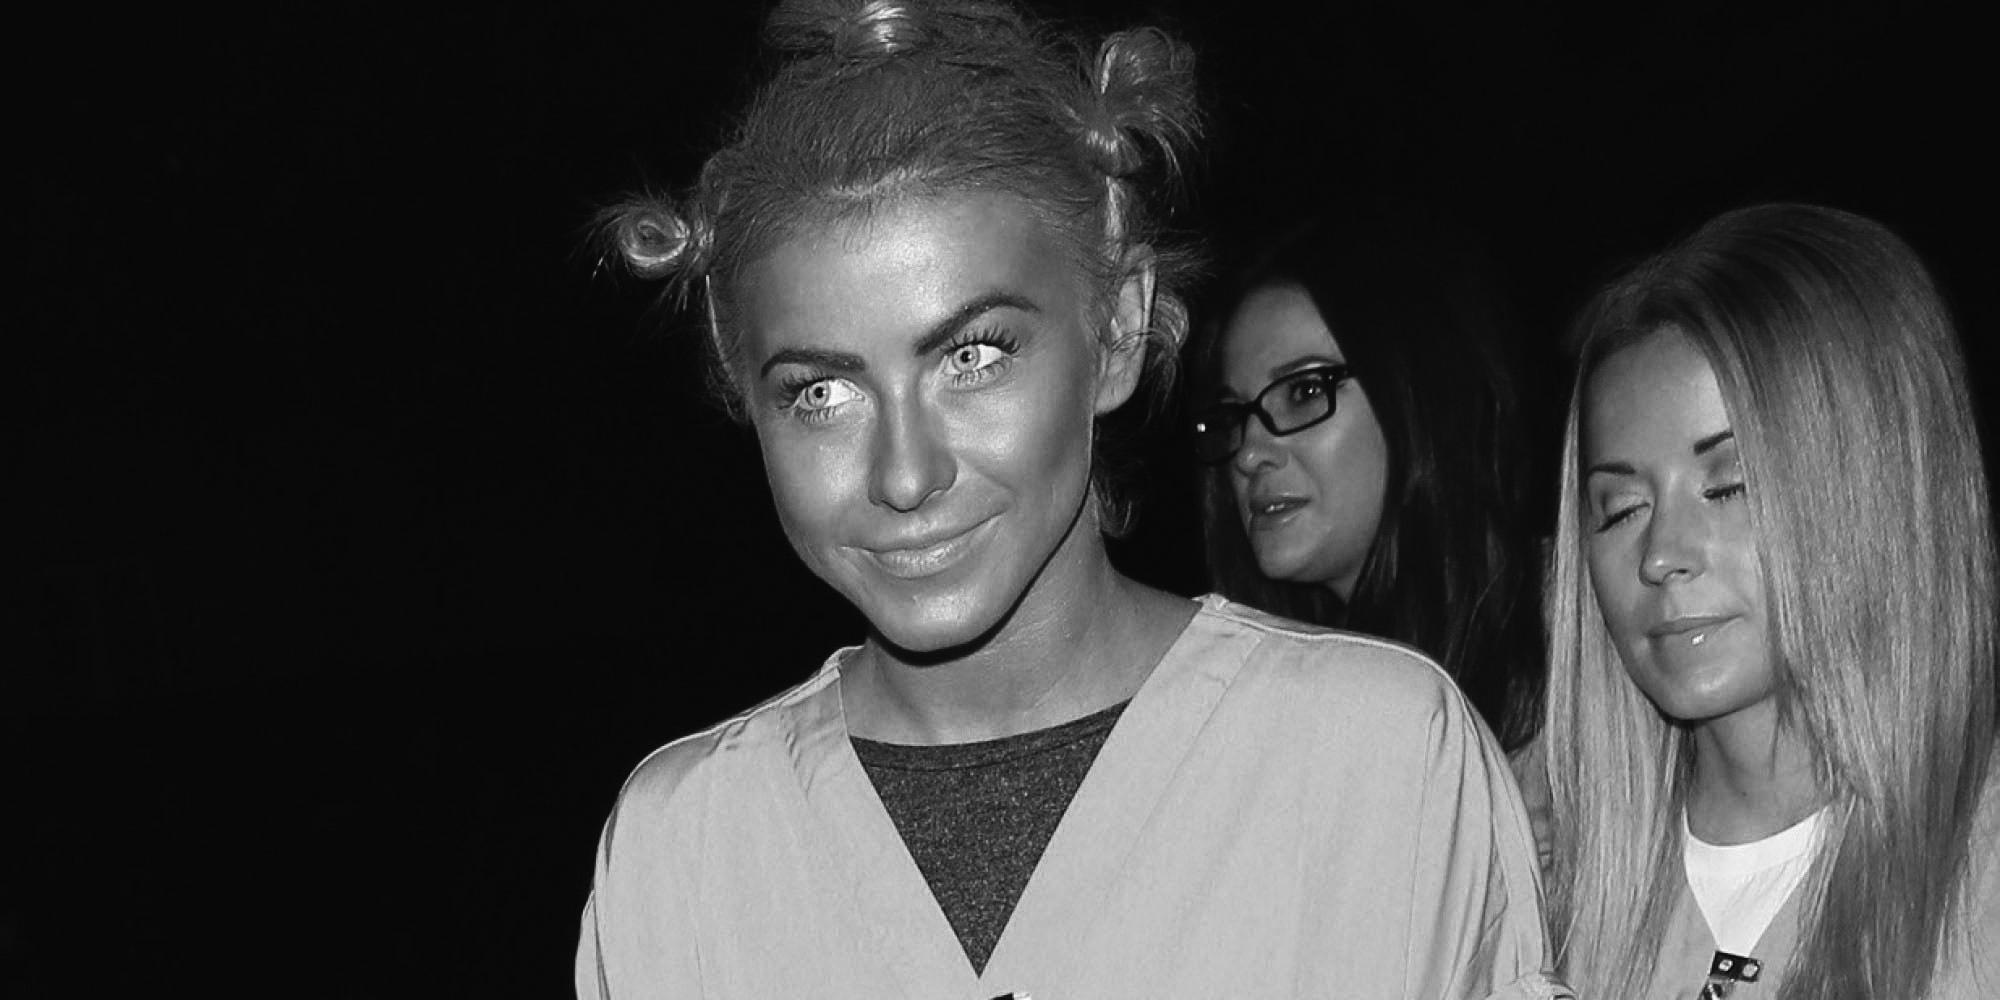 Julianne Hough dresses up as Crazy Eyes from 'Orange is the New Black' as she attends the Casamigos Tequila halloween party in Hollywood